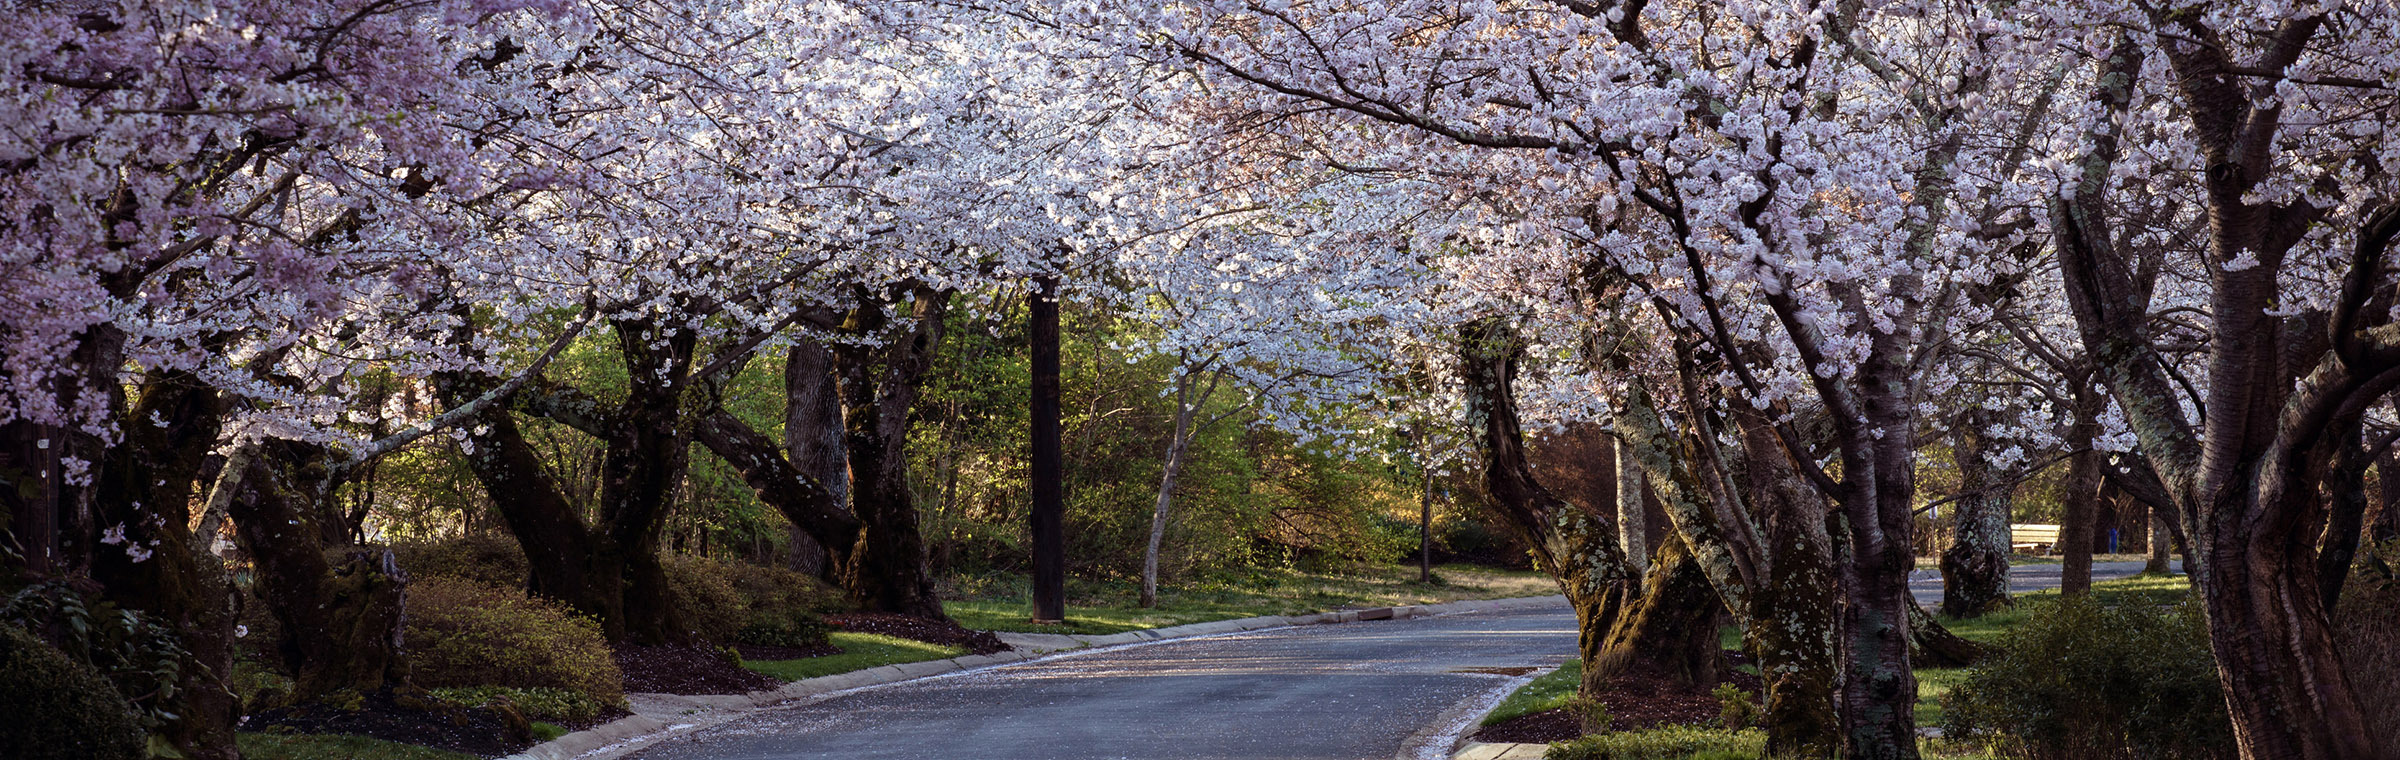 residential street lined with blossoming trees